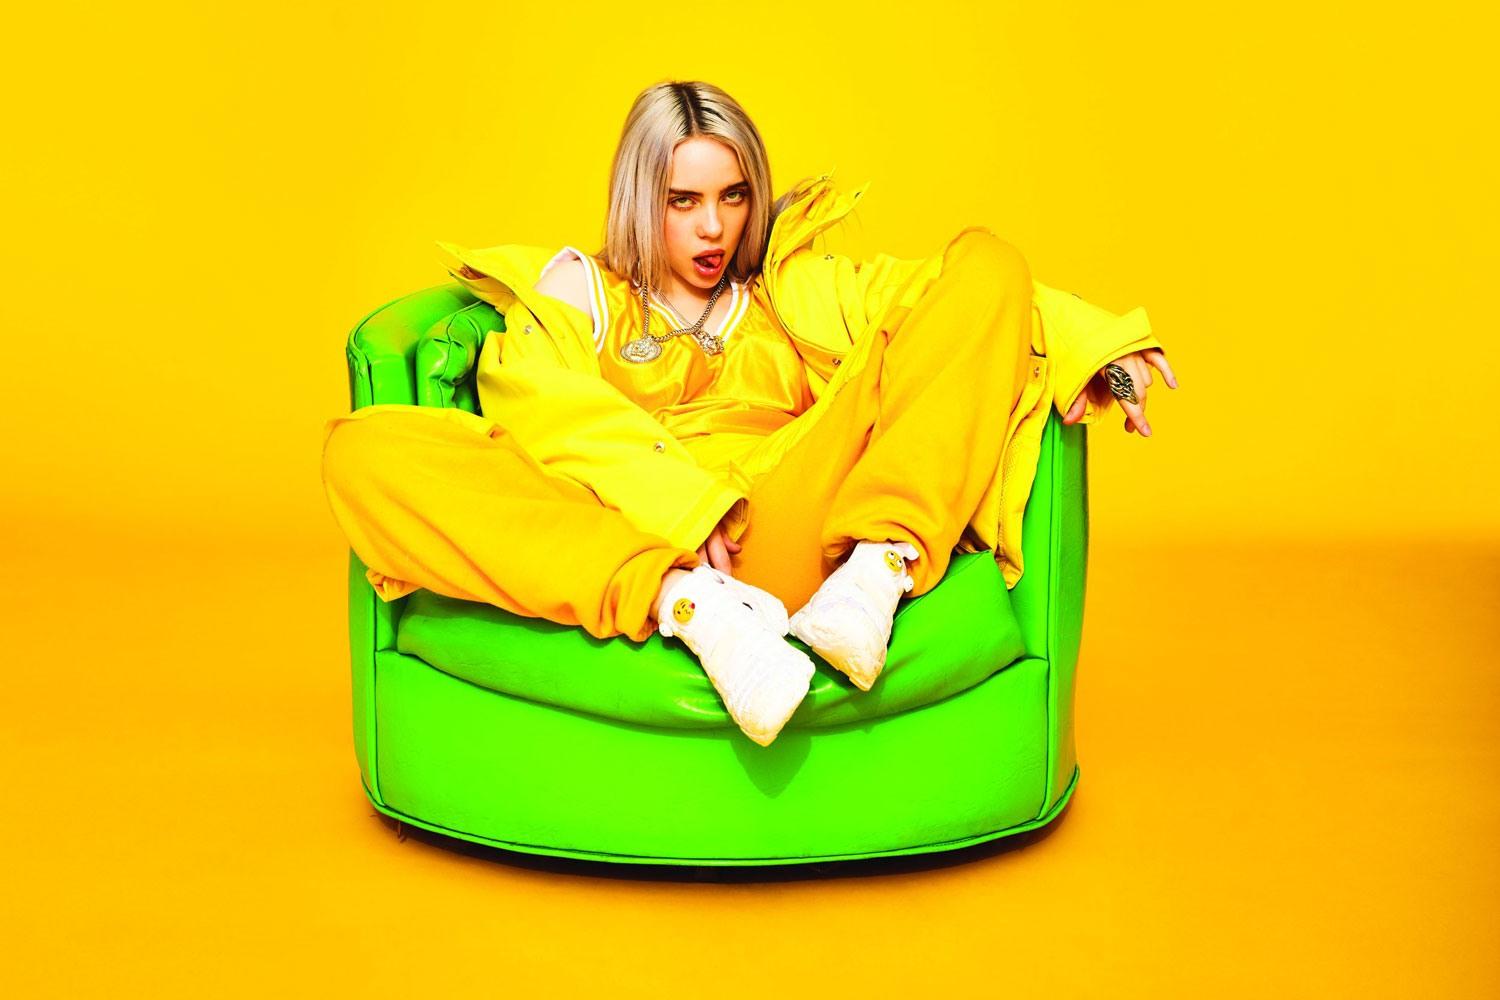 Billie Eilish is going to release a new song tomorrow